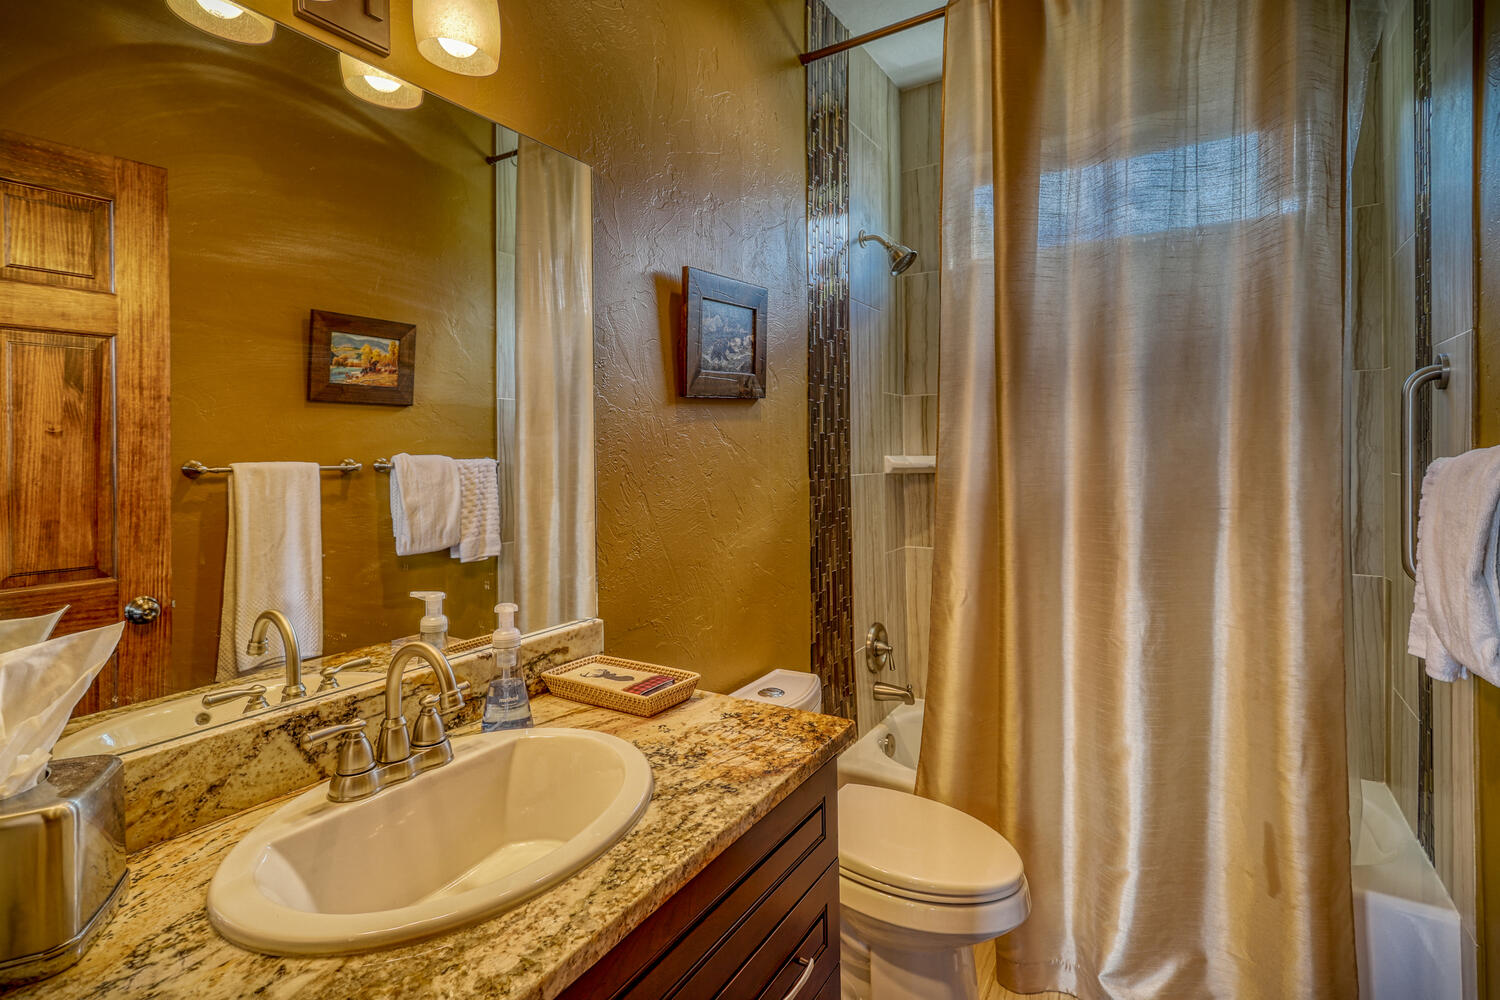 Bathroom at Eagle's View vacation home